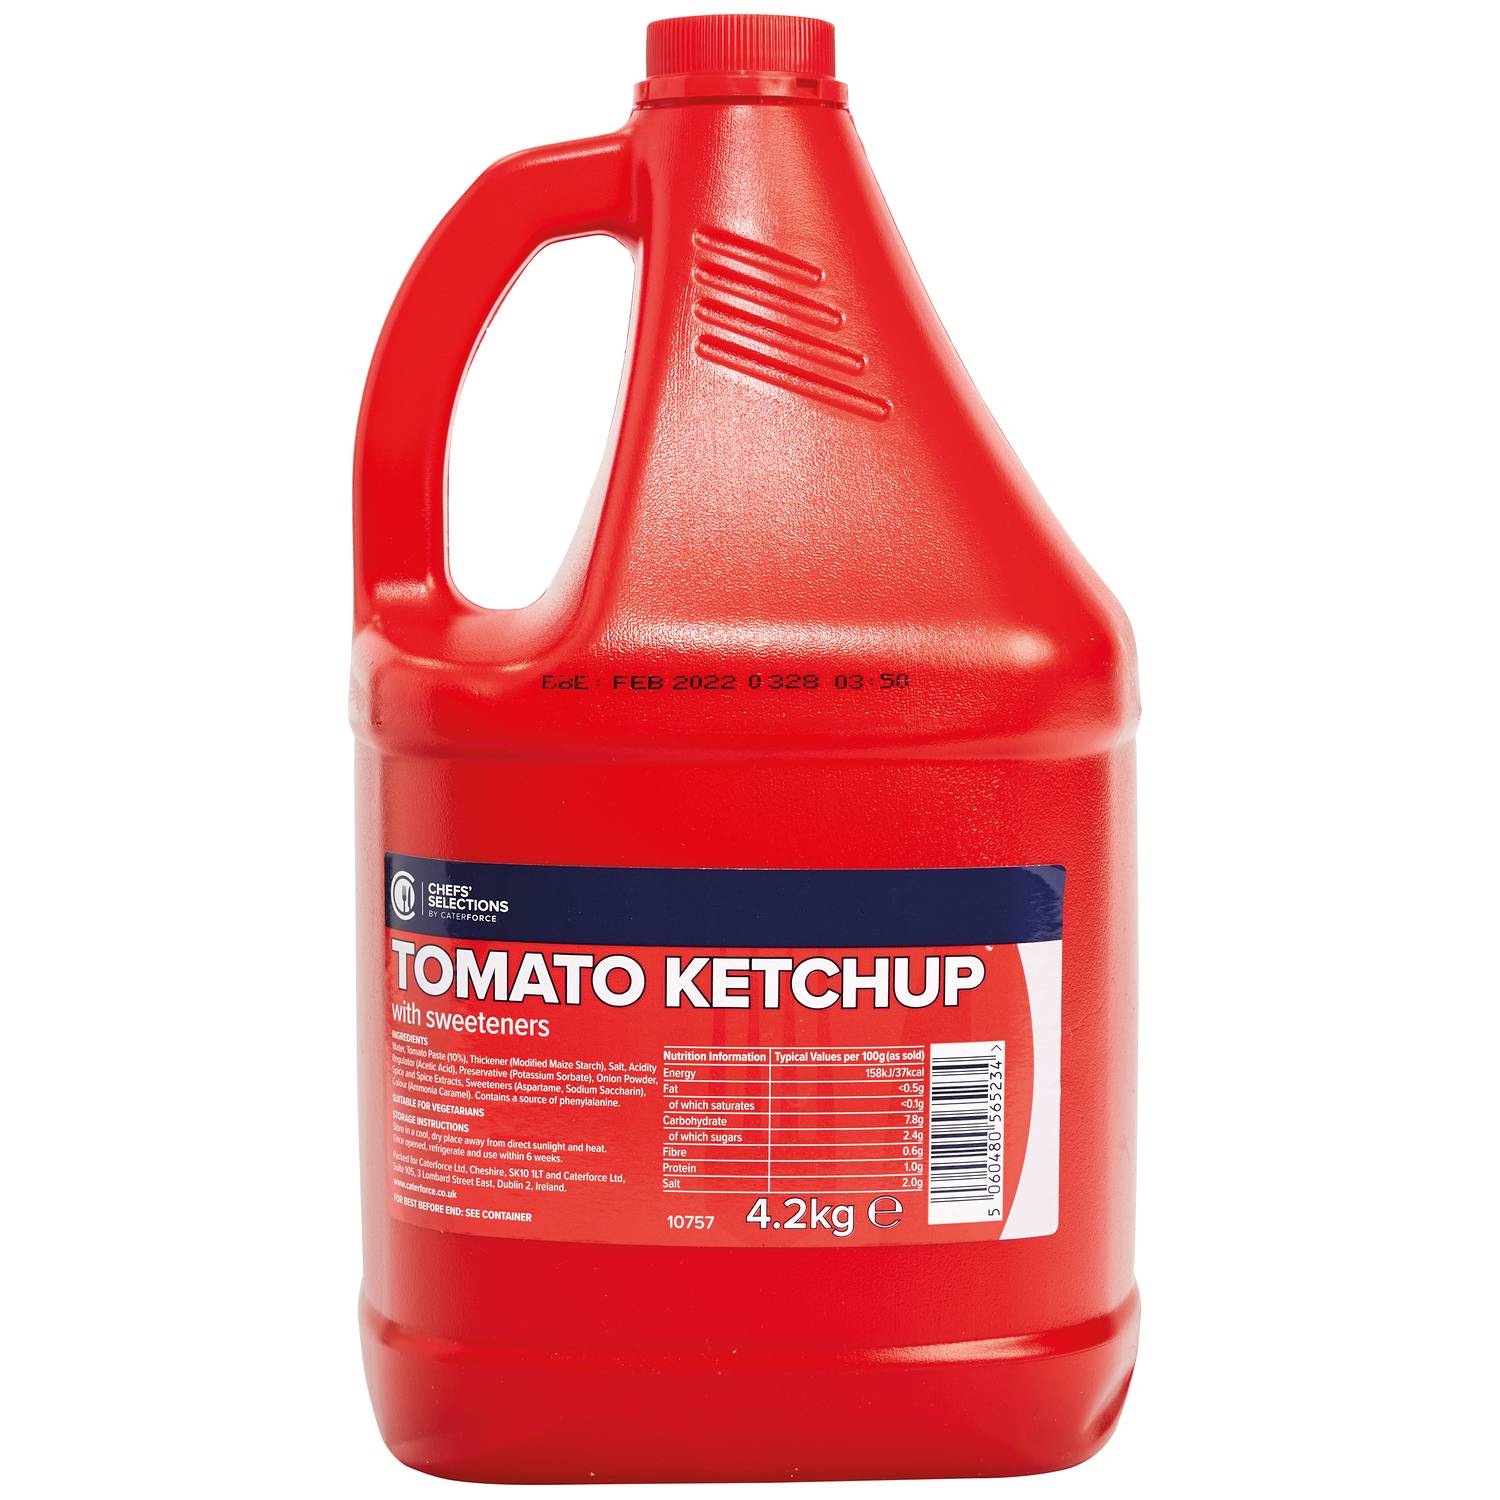 Chefs’ Selections Tomato Ketchup (2 x 4.2kg)